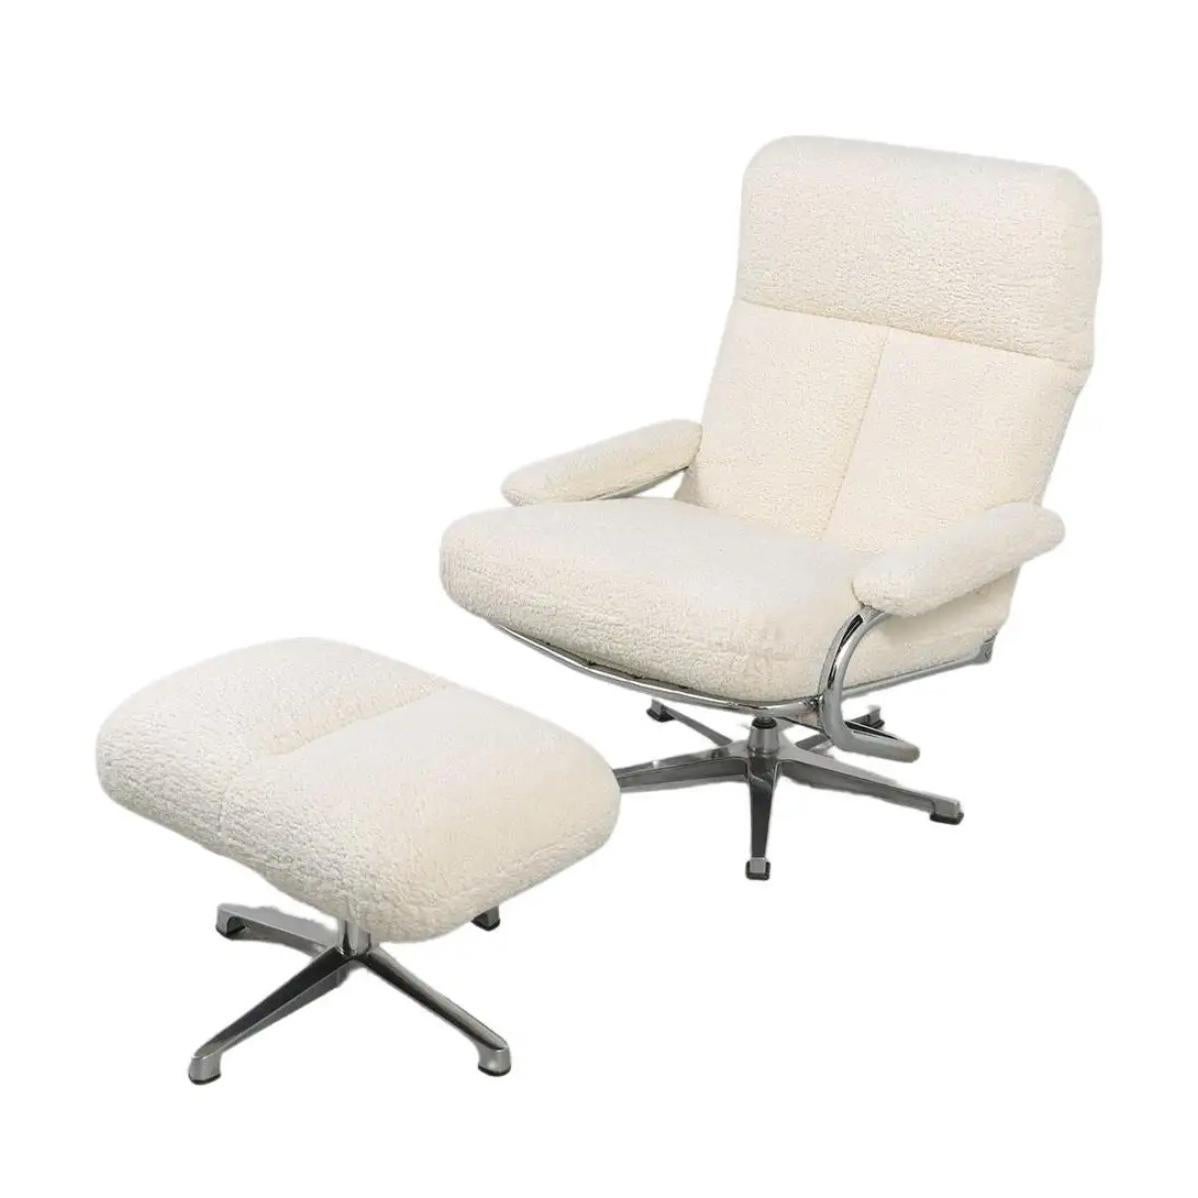 1970s Chrome-Plated Recliner Chair & Ottoman: Mid-Century Modern Revived For Sale 8